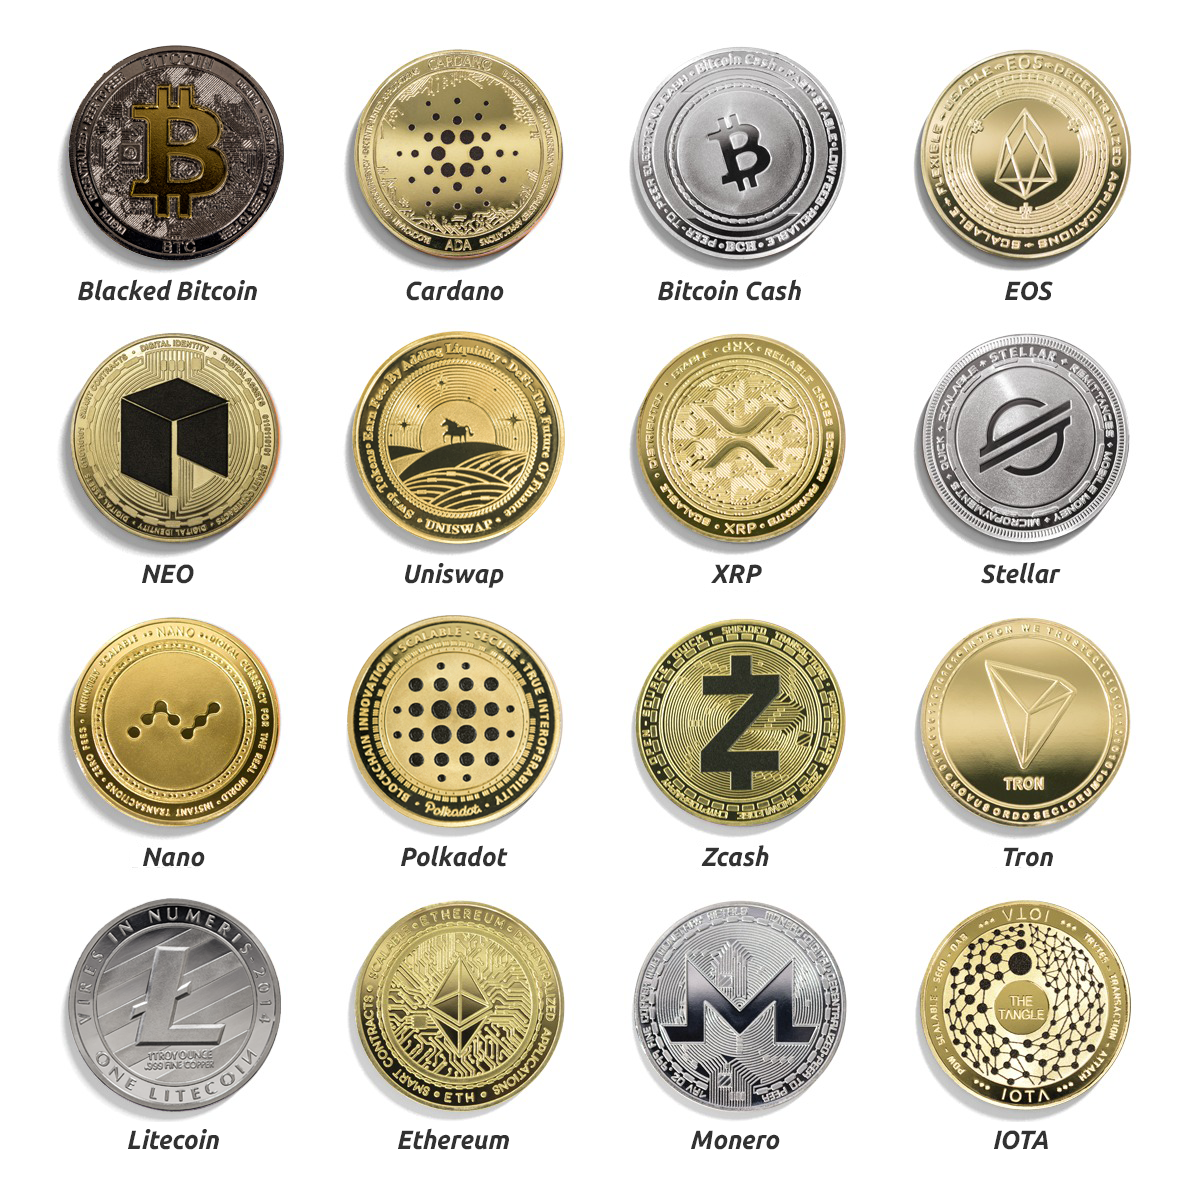 Cryptochips | Coin Capsules (Set of 5) Physical Crypto Coin. Collectable cryptocurrency merch you can hodl